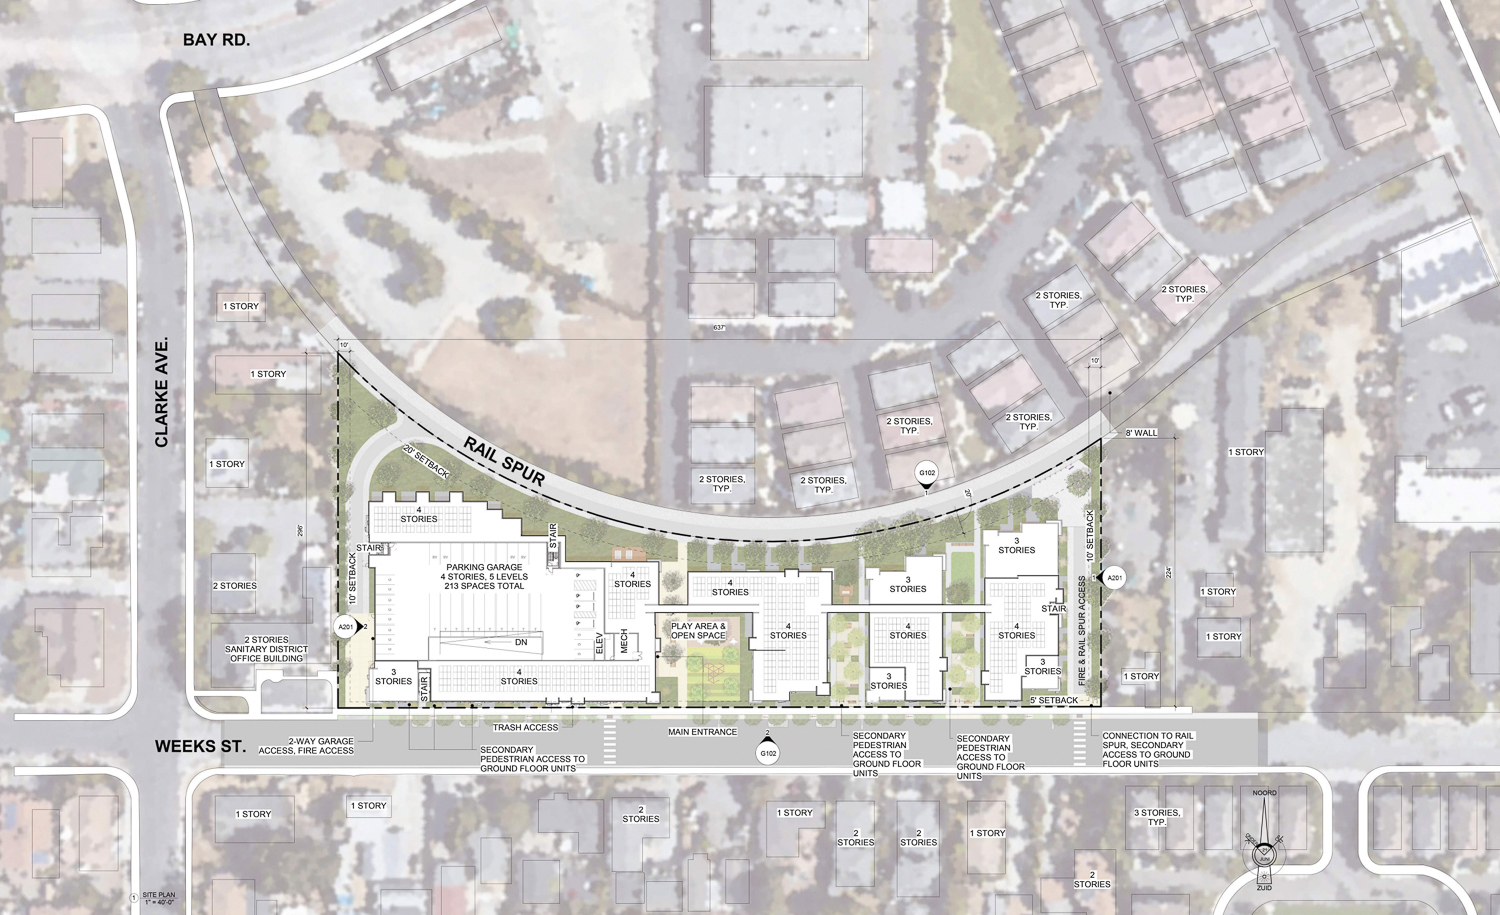 965 Weeks Street area site map, illustration by David Baker Architects